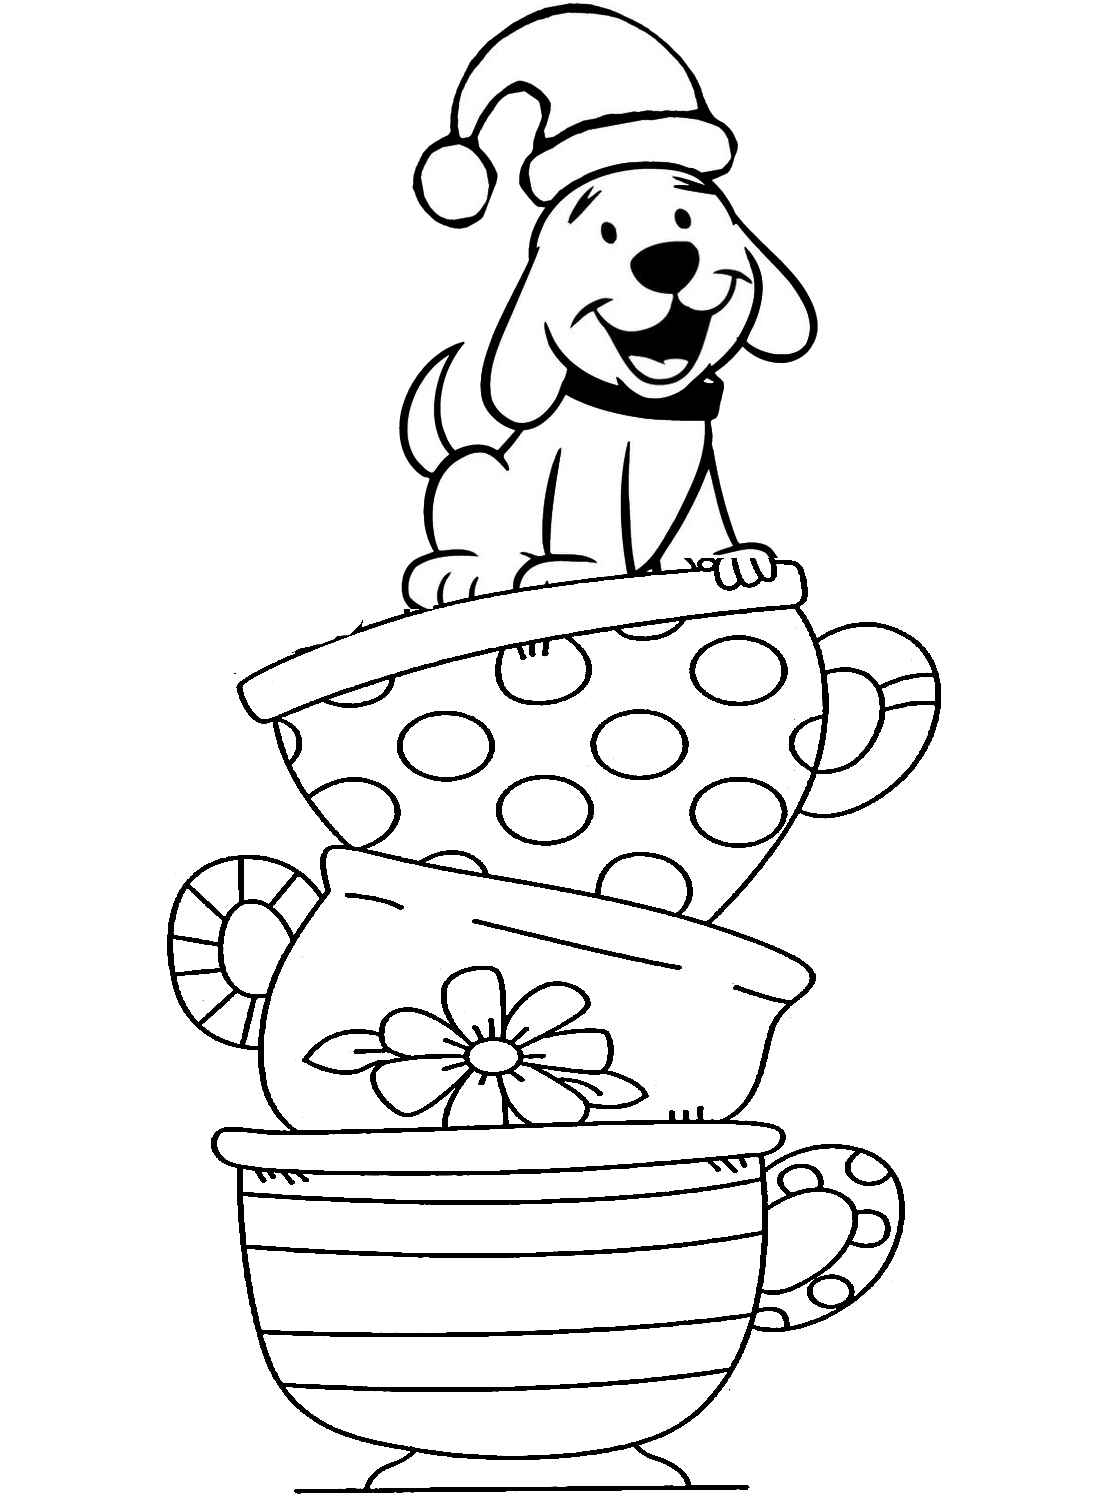 Coloring Sheet of Smile Puppy